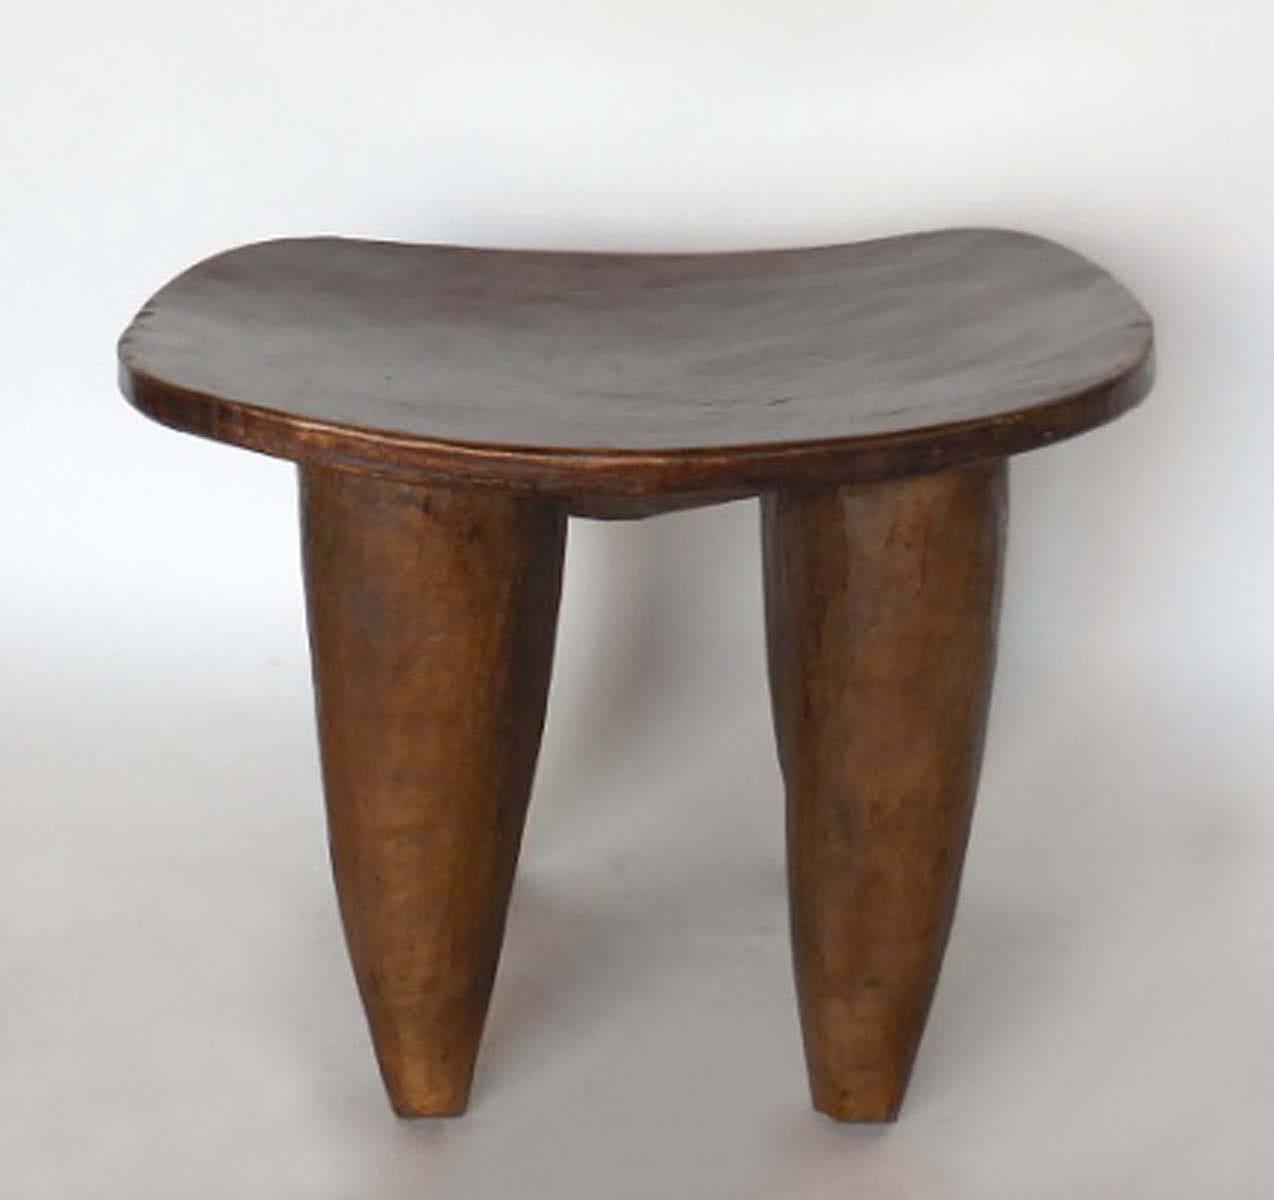 Antique, early 20th century stool or small table carved out of one piece of wood. From the Senufo tribe in Mali.